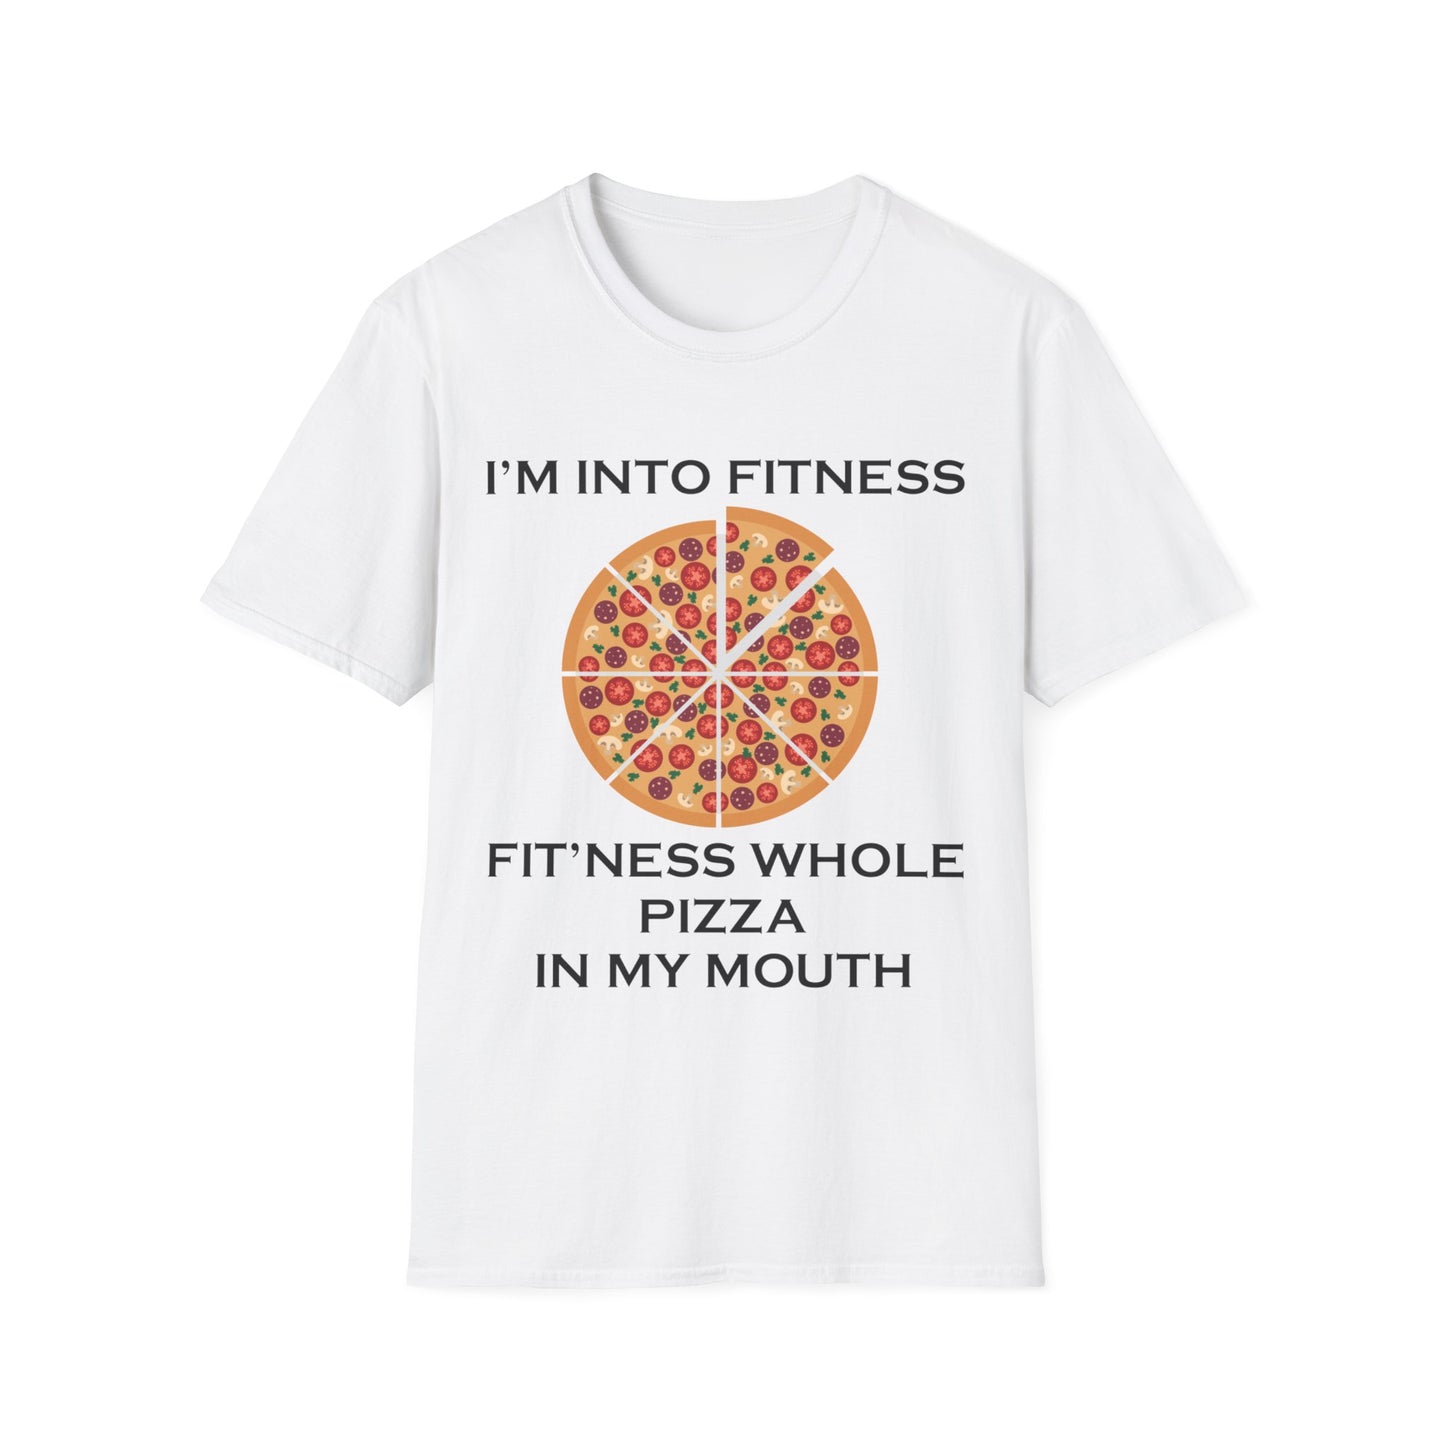 A white t-shirt with a design of a pizza and the funny quote: I'm Into Fitness, Fit'ness Whole Pizza In My Mouth